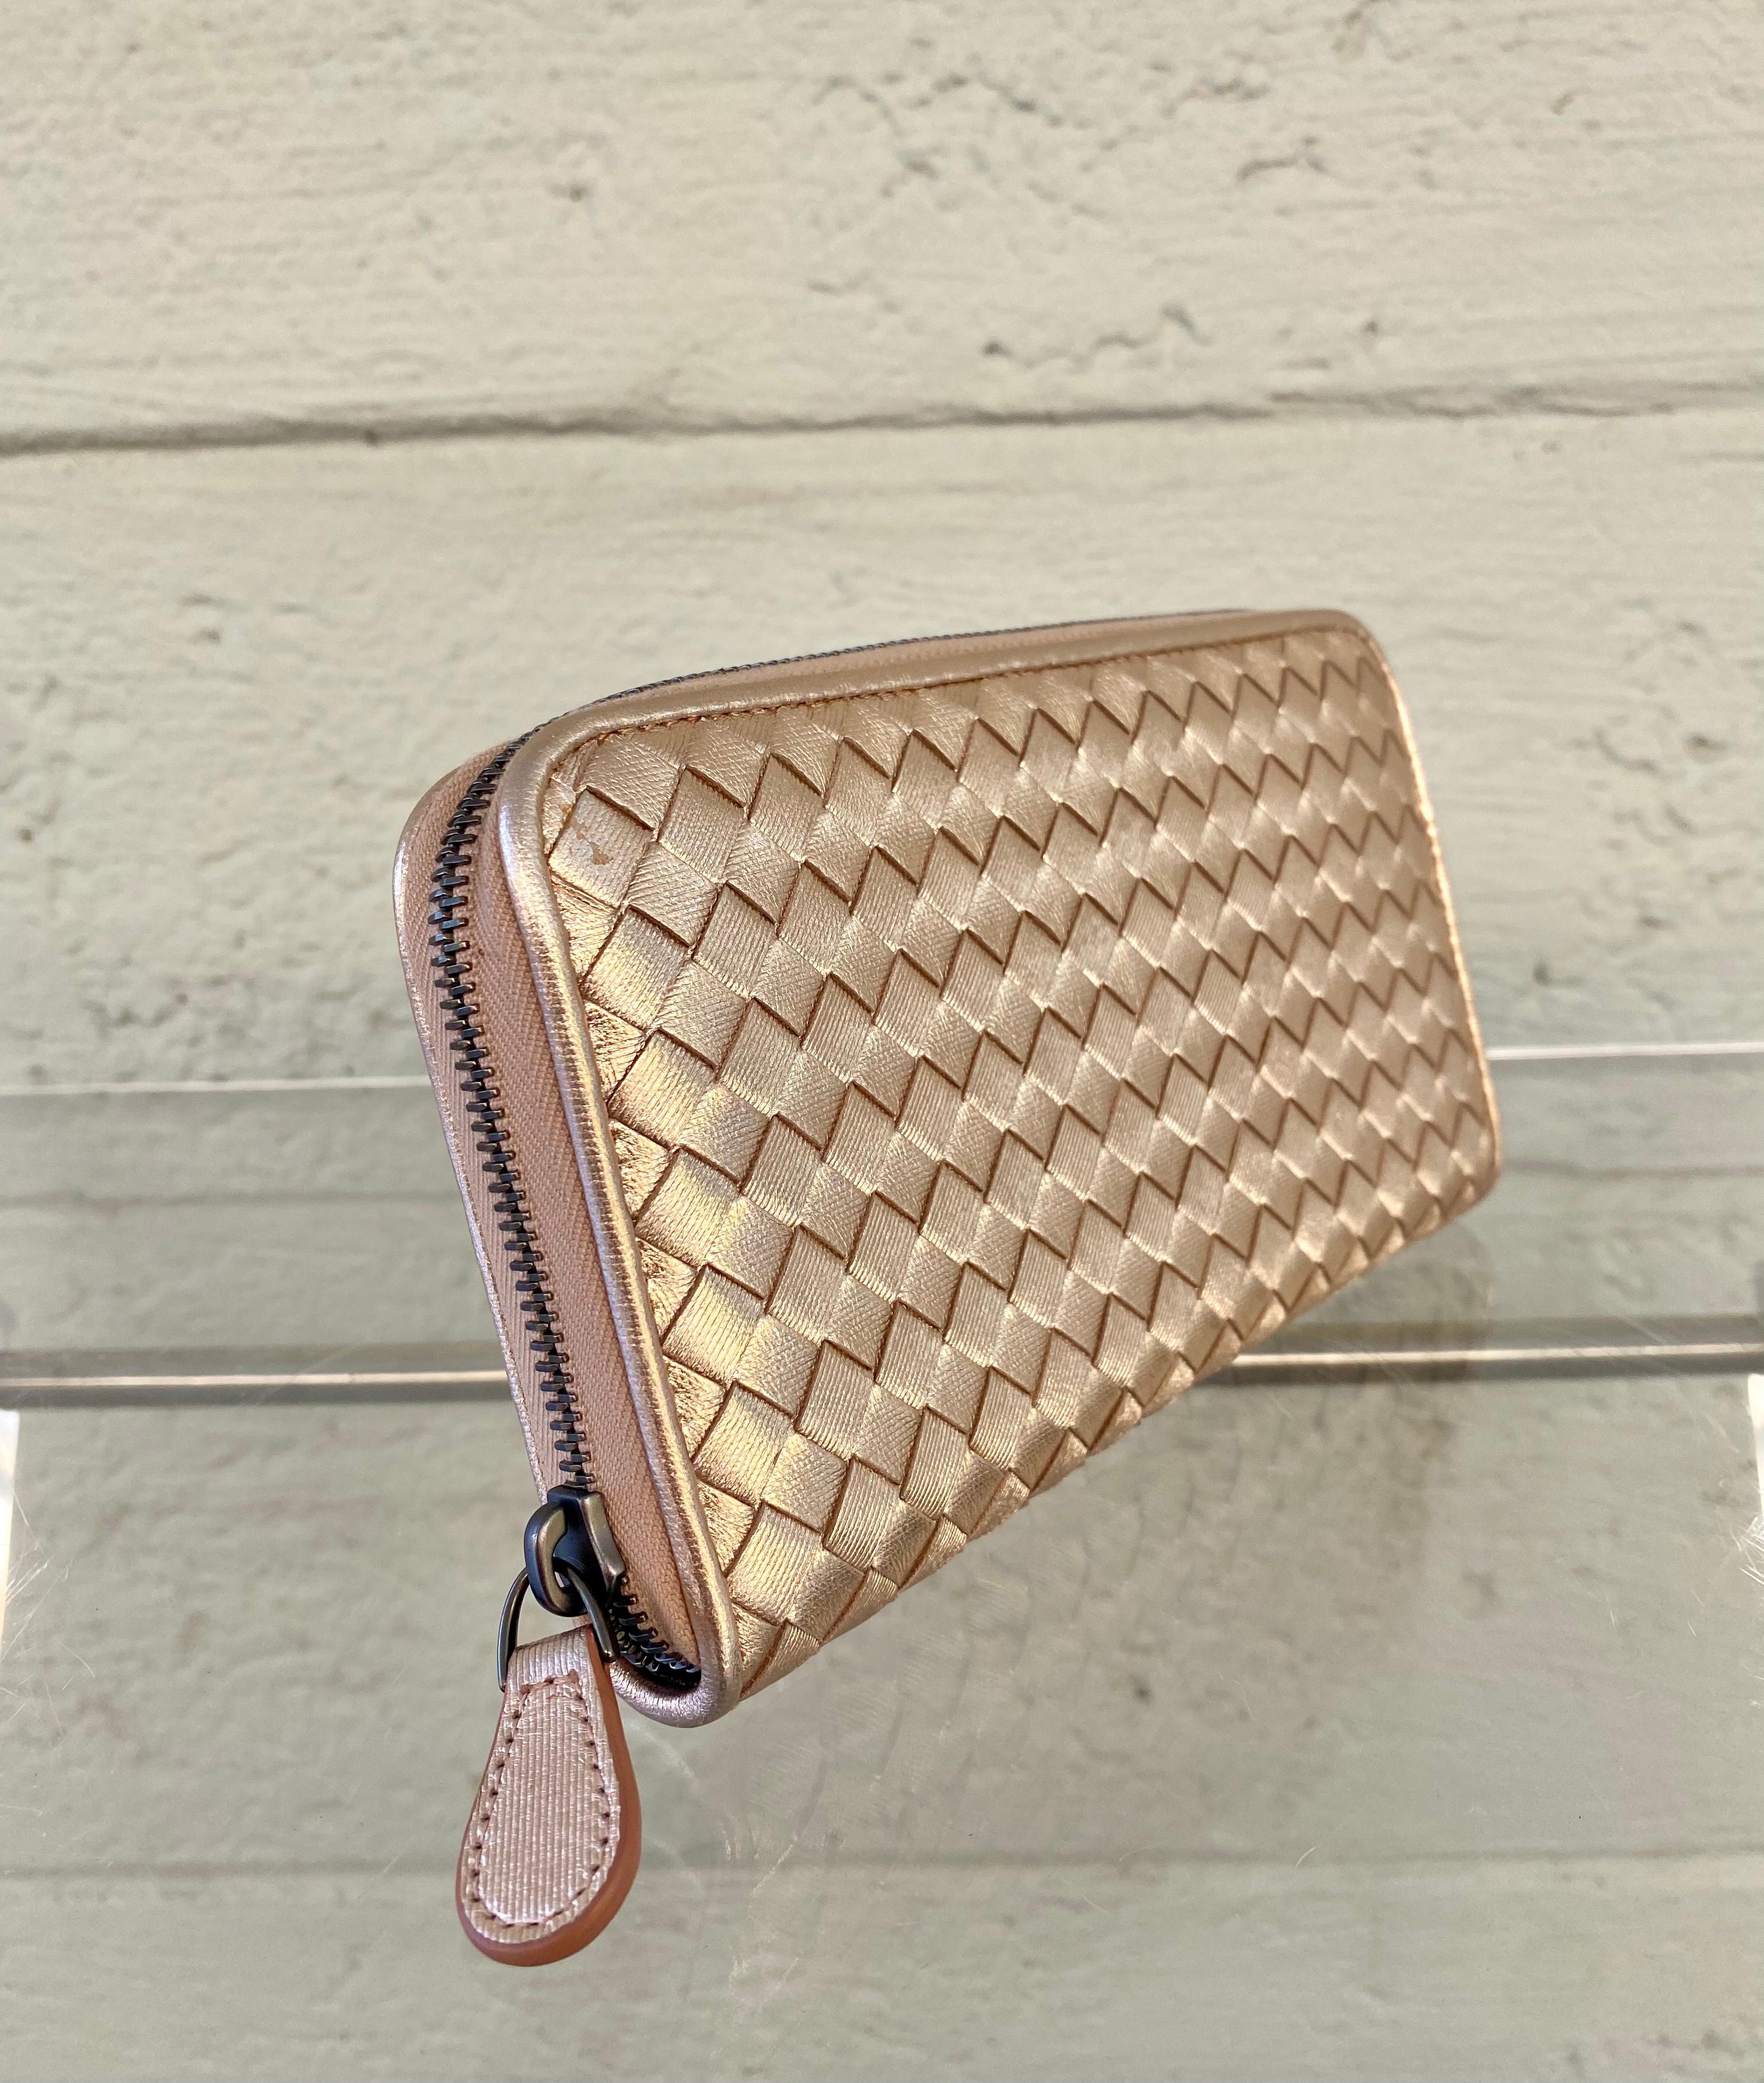 The ultimate in accesories making luxury craftsmanship. The Iconic House of Bottega Veneta always provides us with timeless and classic pieces. This beautiful wallet takes timeless creation to a new level of sophistication and charm. Made from the